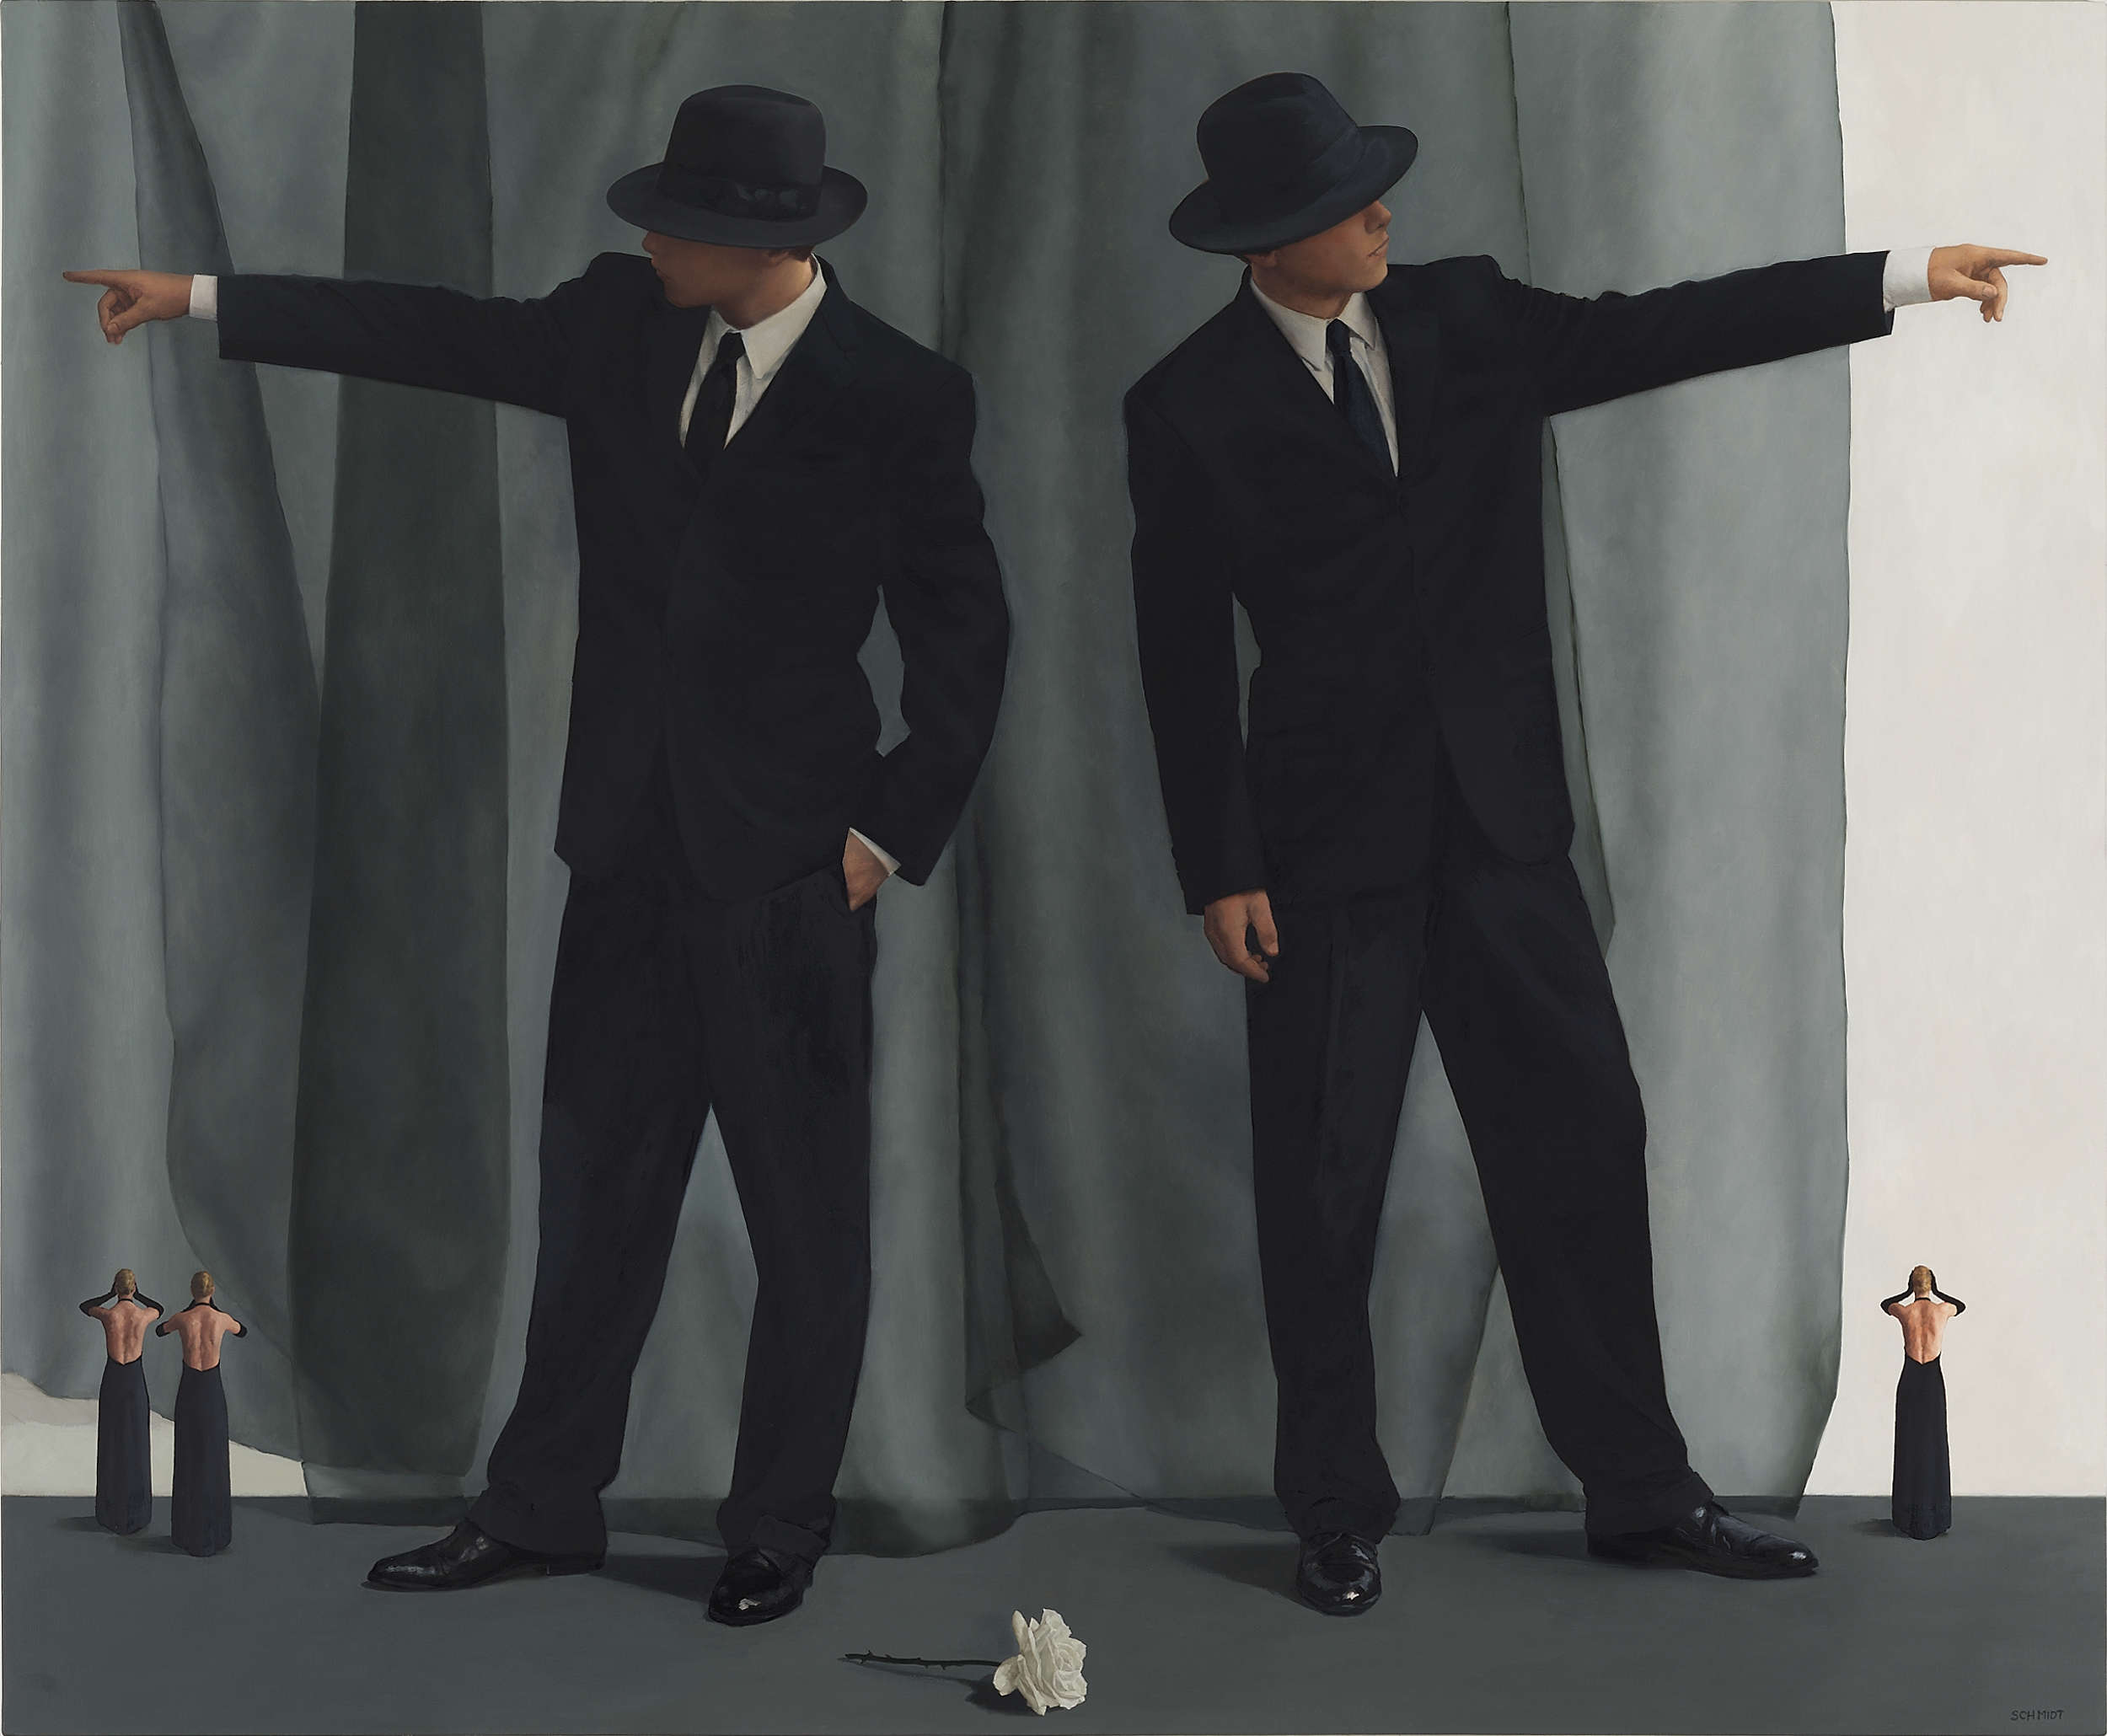 2 male figures wearing suits and fedora hats (both Michael Philip) pointing in opposite directions, 3 small female figures, hear no evil, see no evil, speak no evil